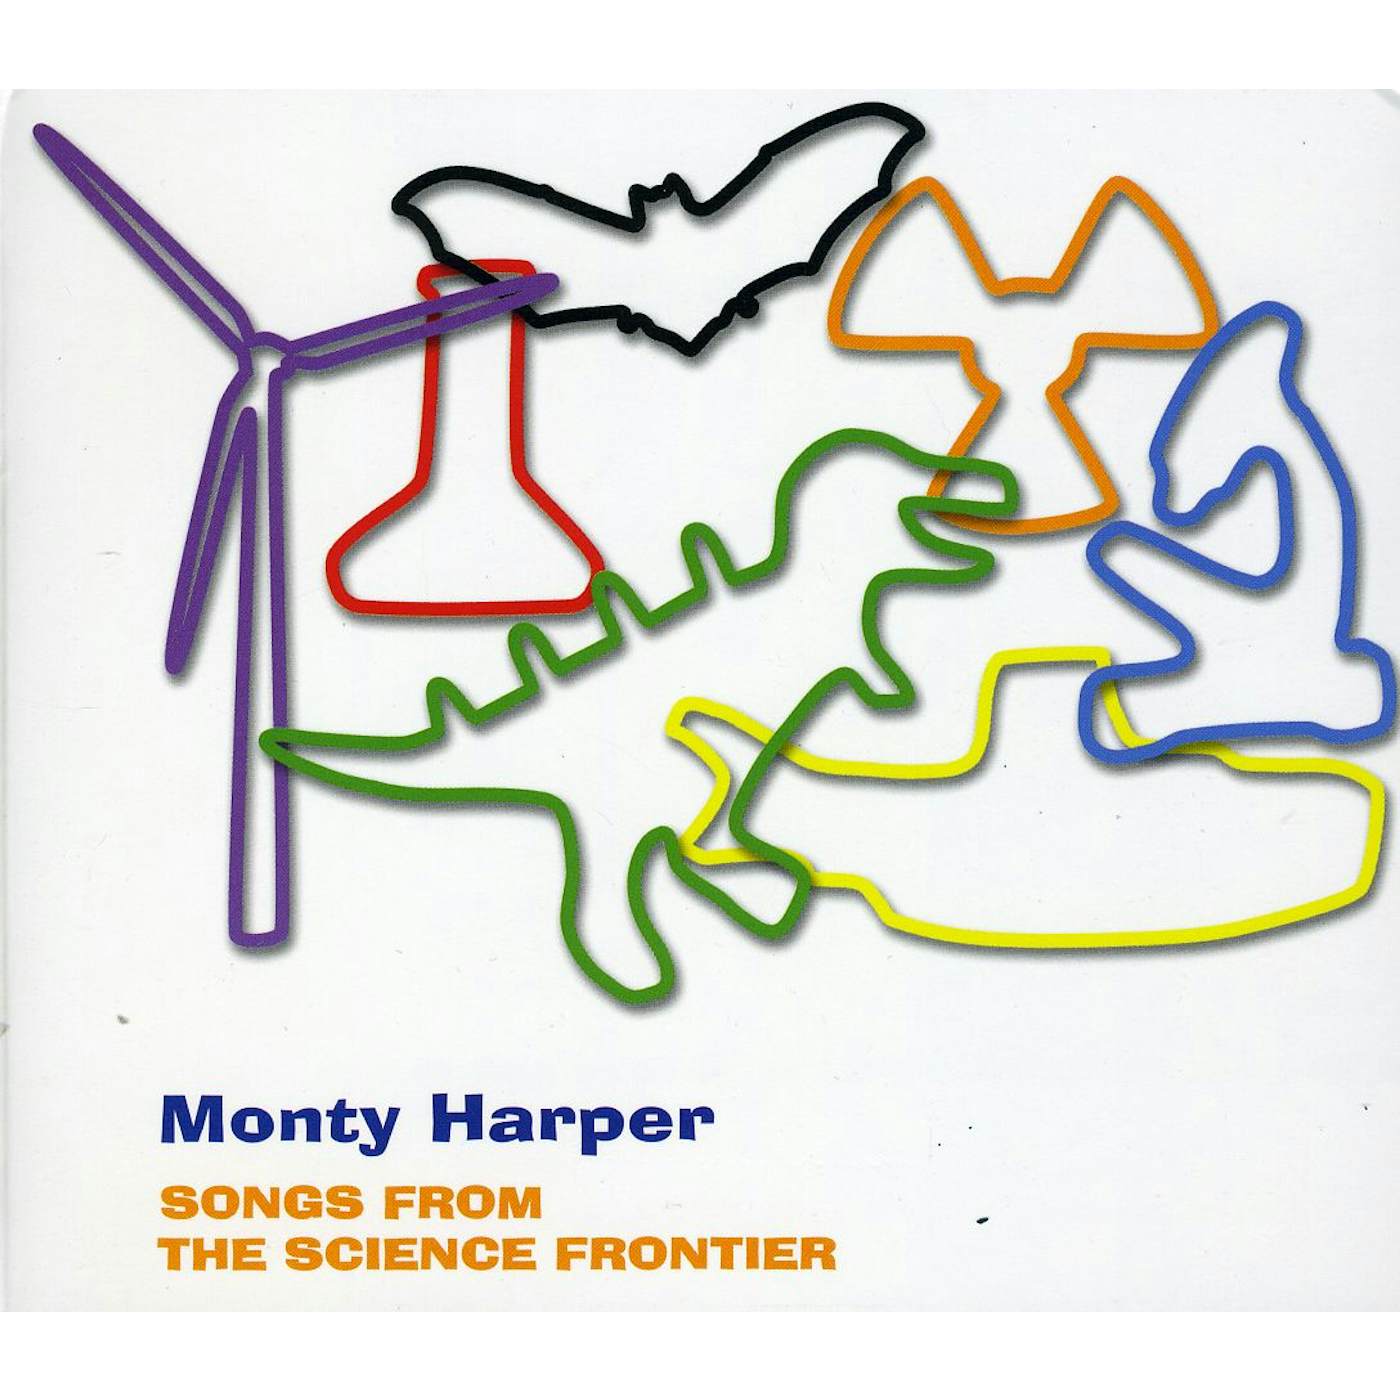 Monty Harper SONGS FROM THE SCIENCE FRONTIER CD